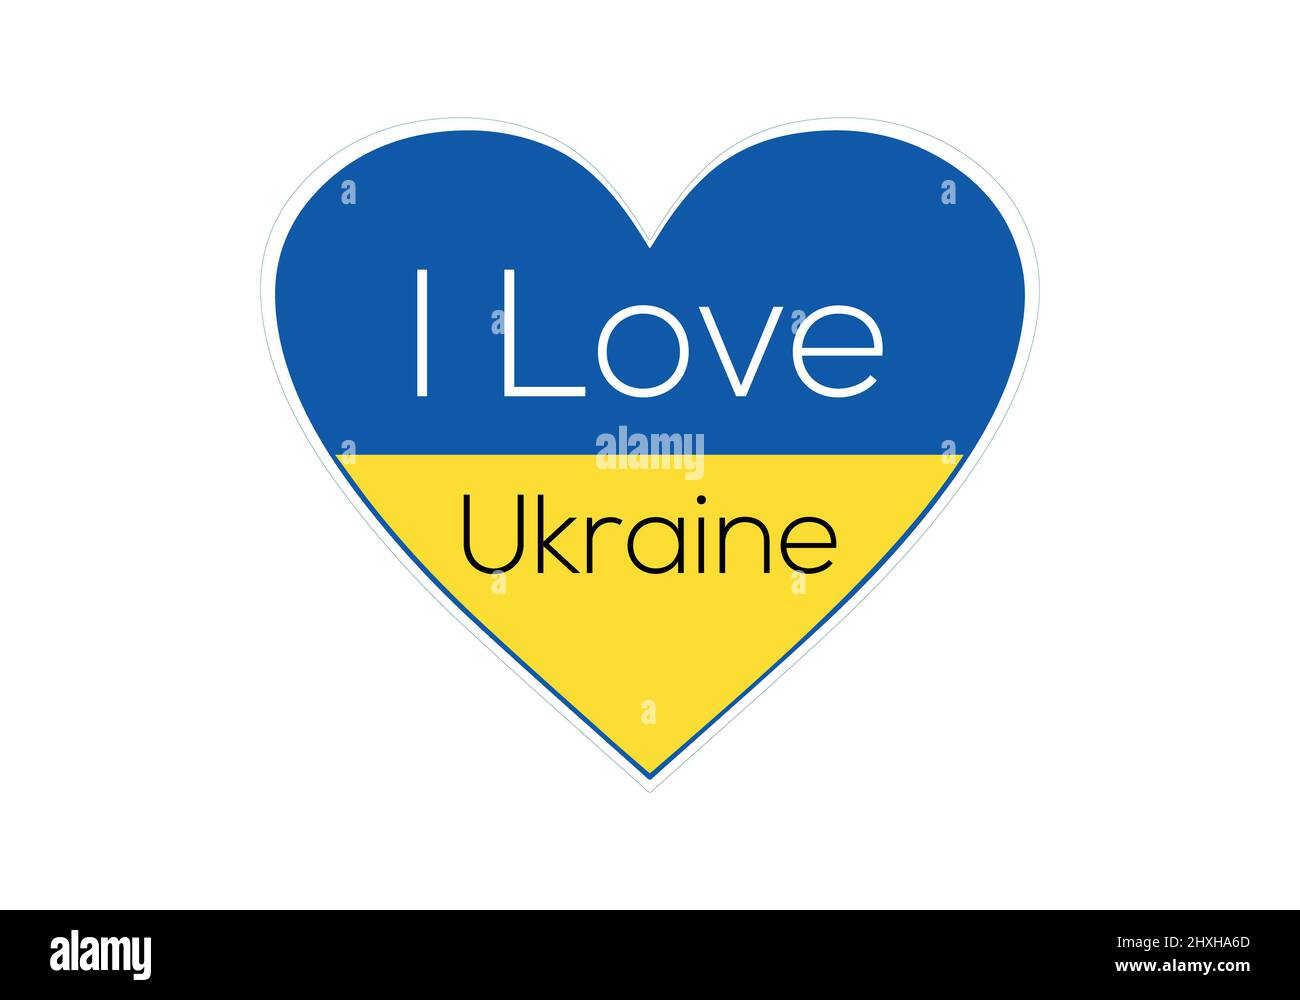 We are Ukraine supporter. We love Ukraine and peoples. We love and support Ukraine people and flag and country Stock Photo